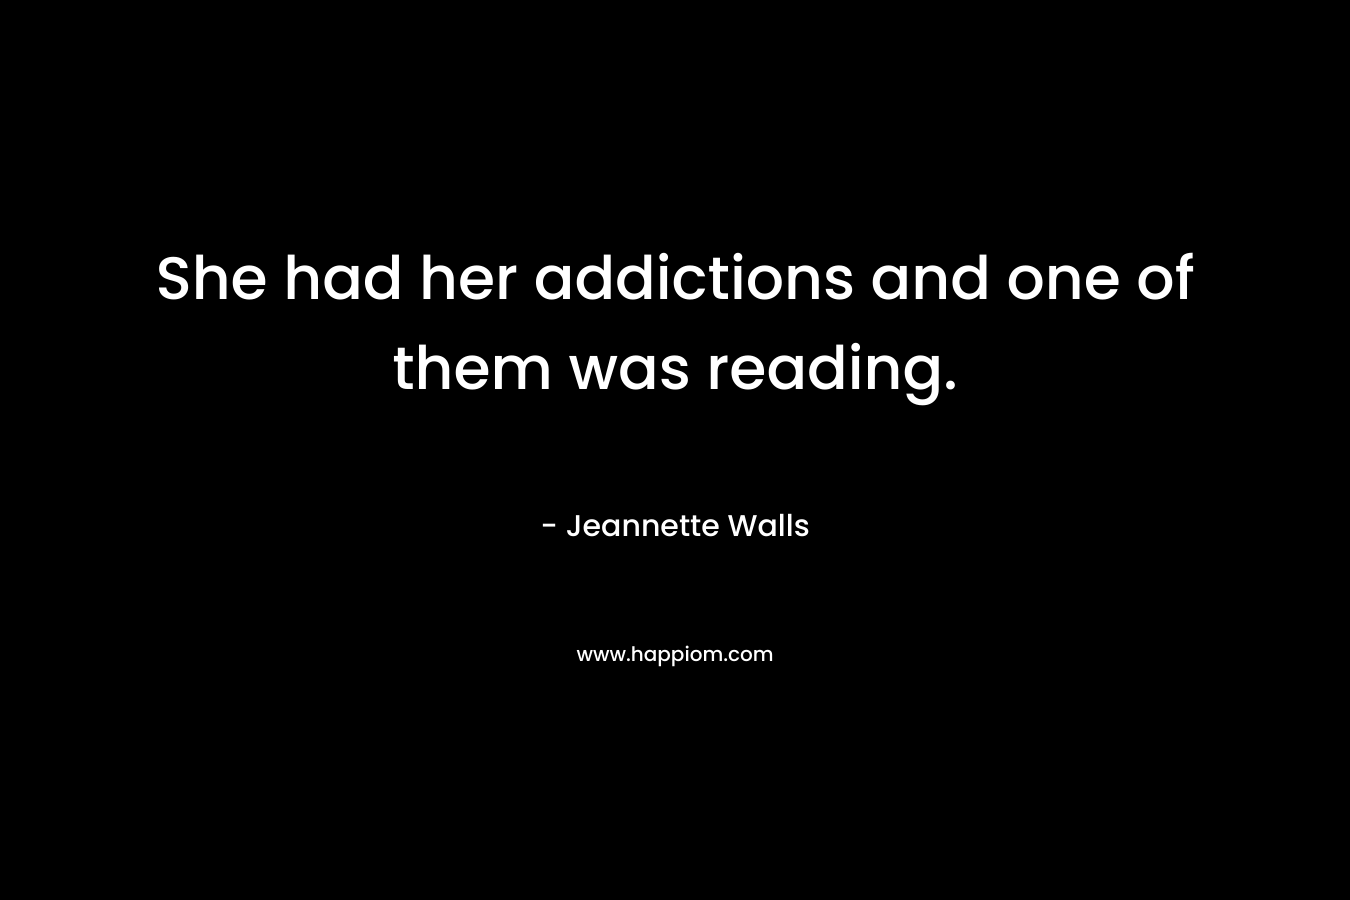 She had her addictions and one of them was reading. – Jeannette Walls